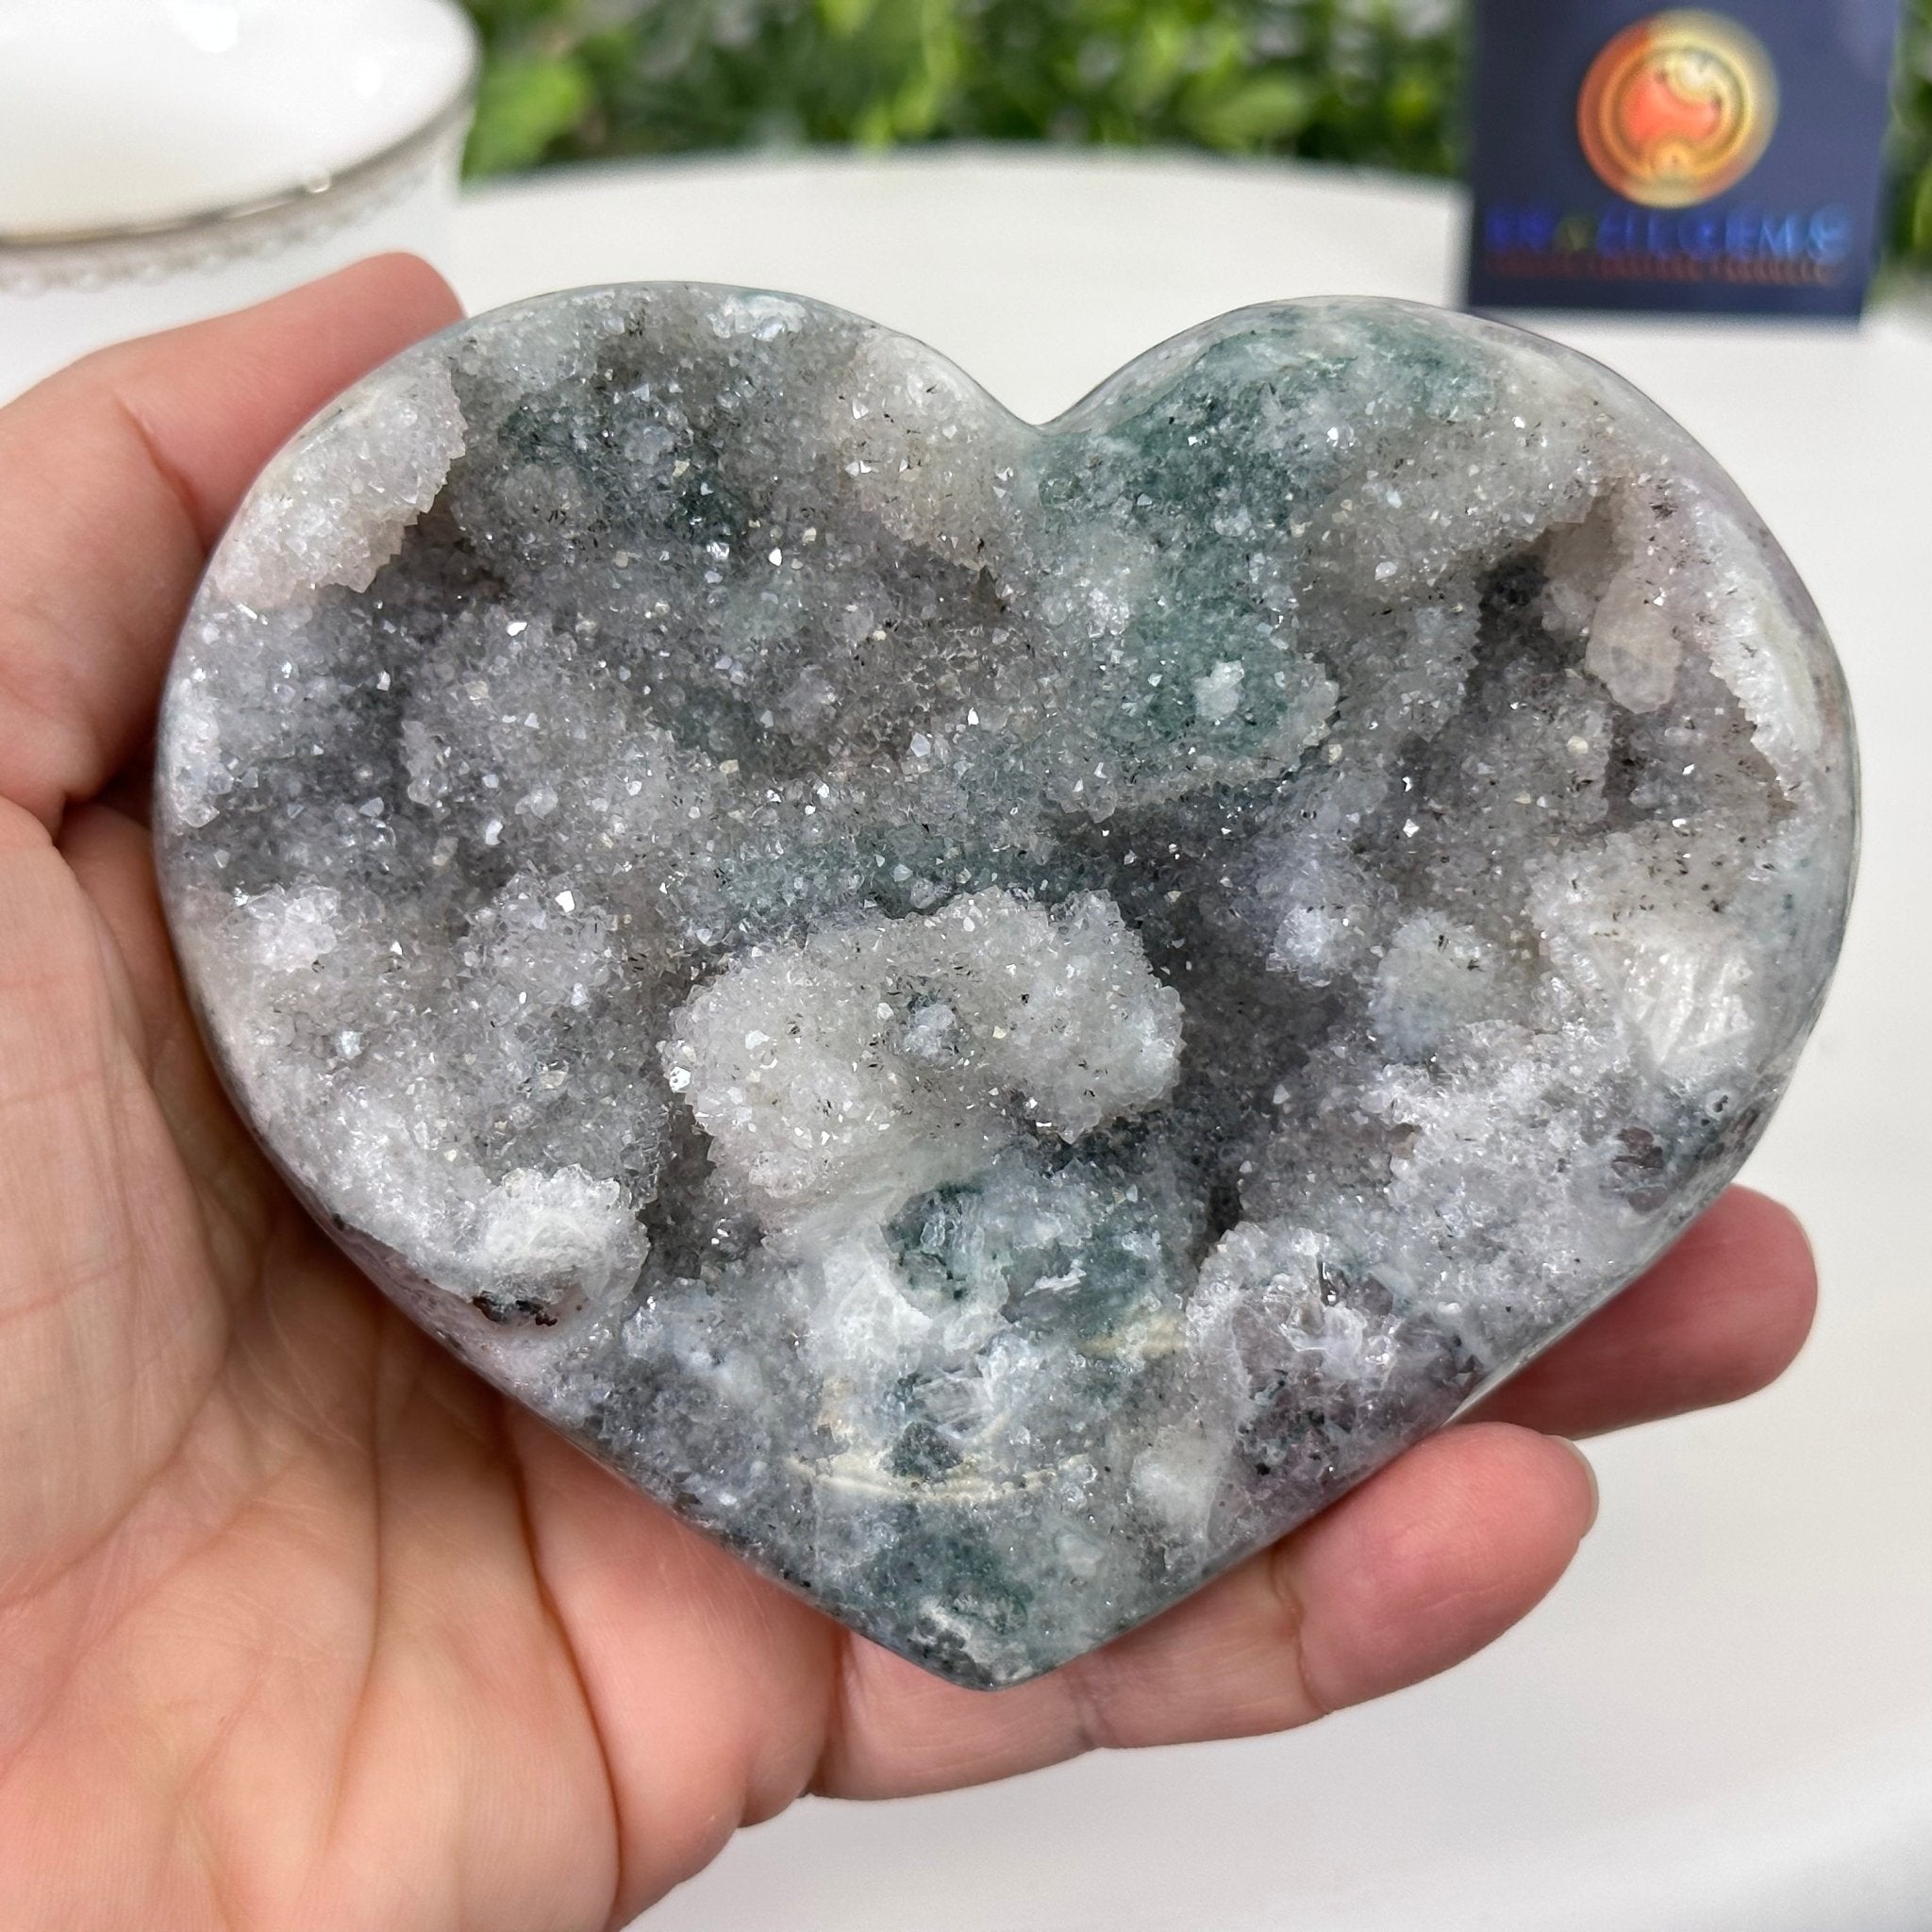 Extra Quality Amethyst Heart Geode on an Acrylic Stand, 1.26 lbs & 3.25" Tall #5462-0059 by Brazil Gems - Brazil GemsBrazil GemsExtra Quality Amethyst Heart Geode on an Acrylic Stand, 1.26 lbs & 3.25" Tall #5462-0059 by Brazil GemsHearts5462-0059